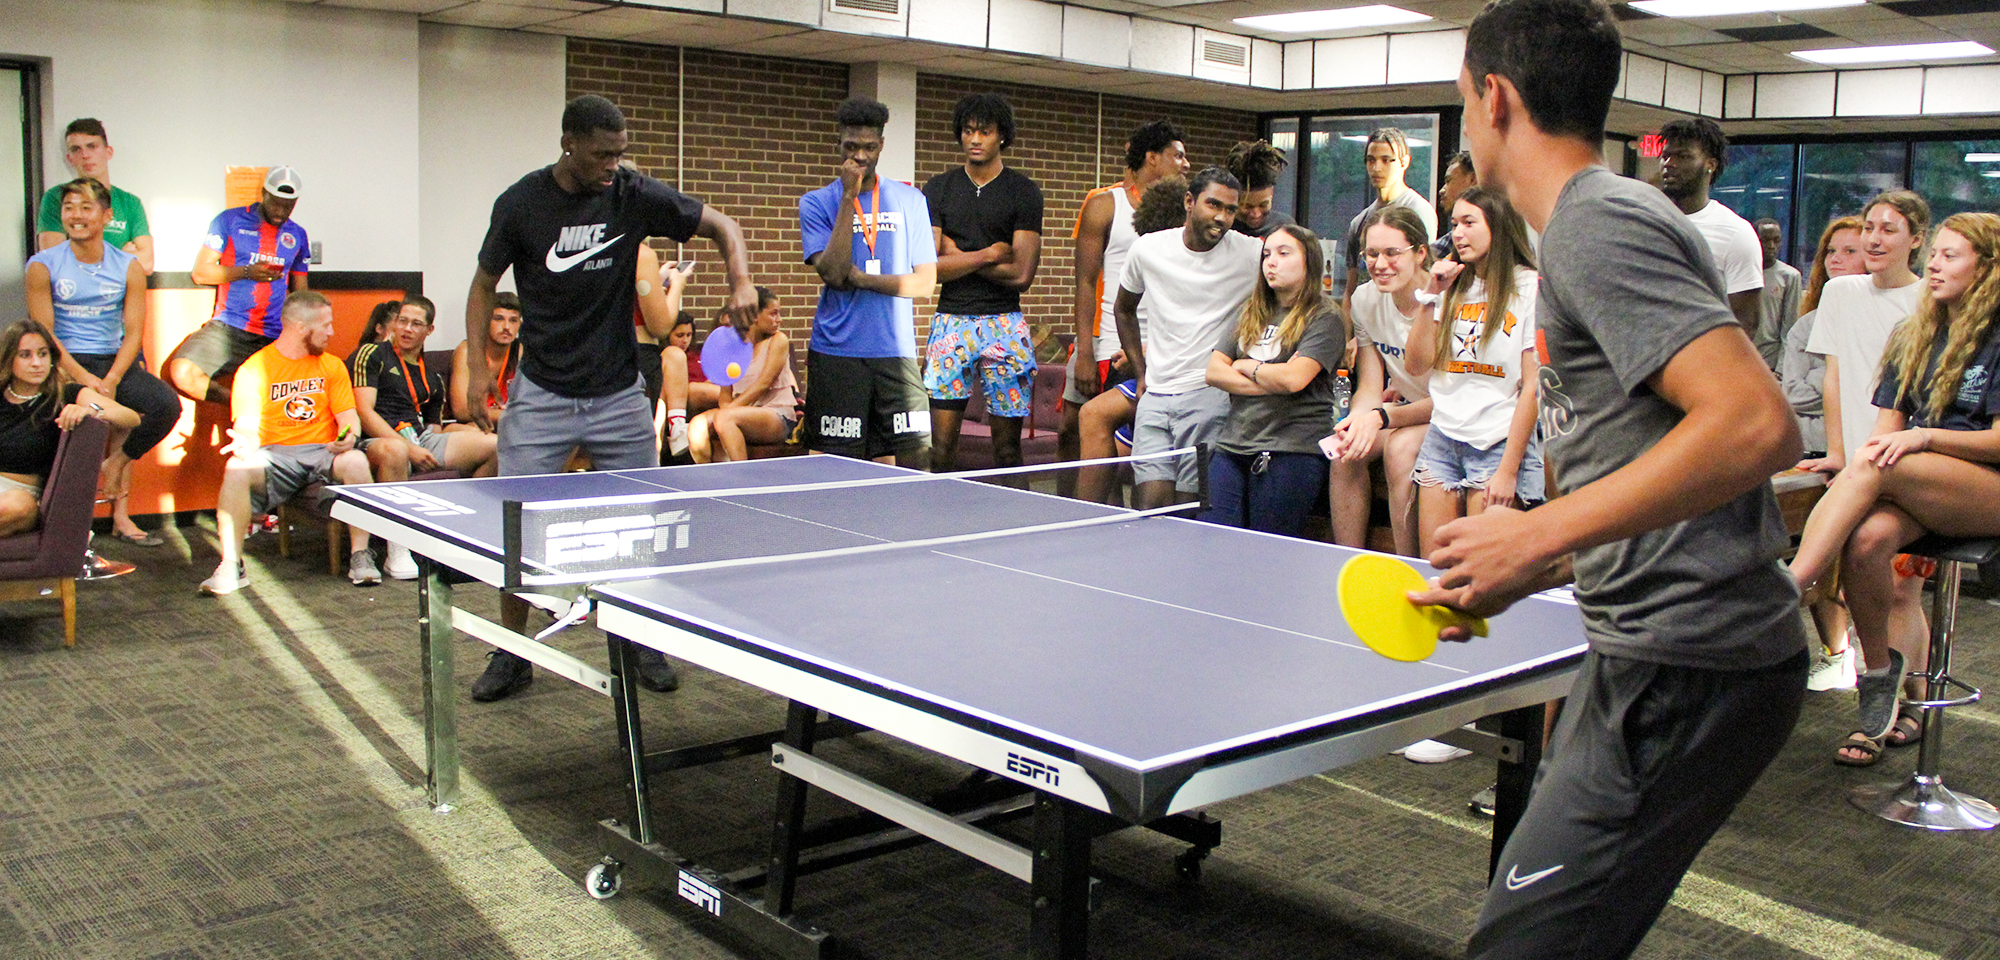 Students playing intramural pool